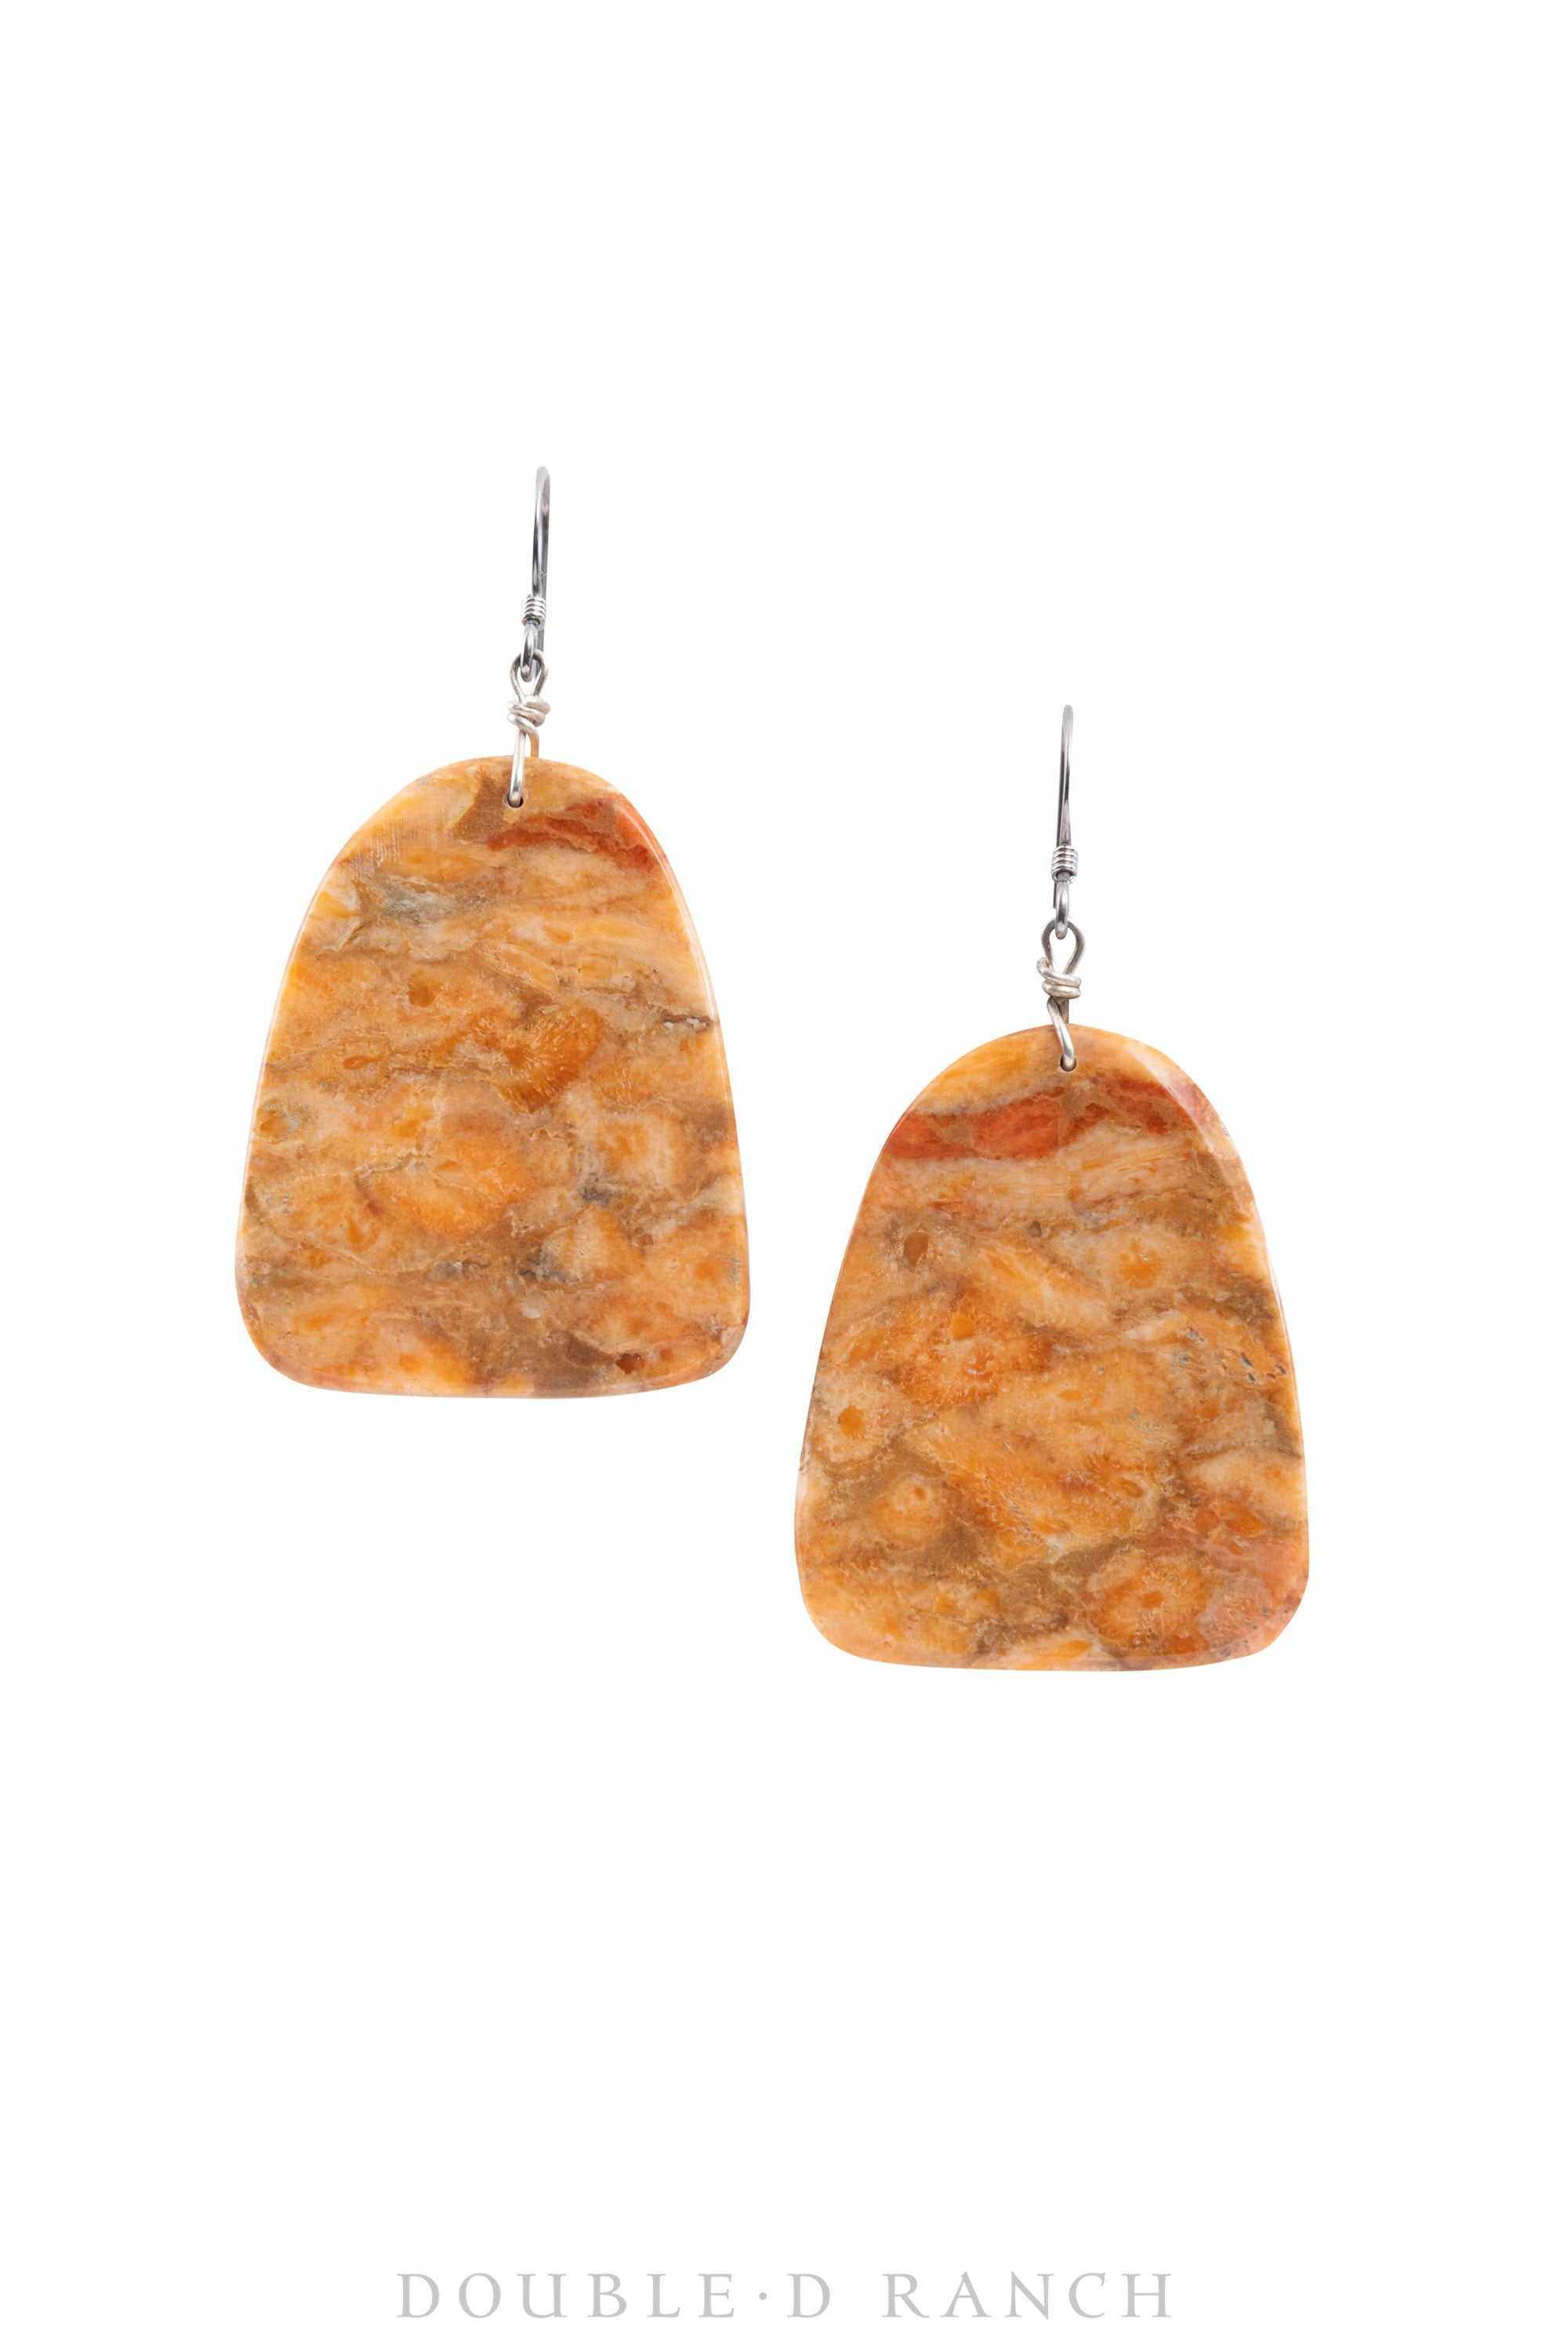 Earrings, Slab, Apple Coral Composite, Artisan, Contemporary, 1364